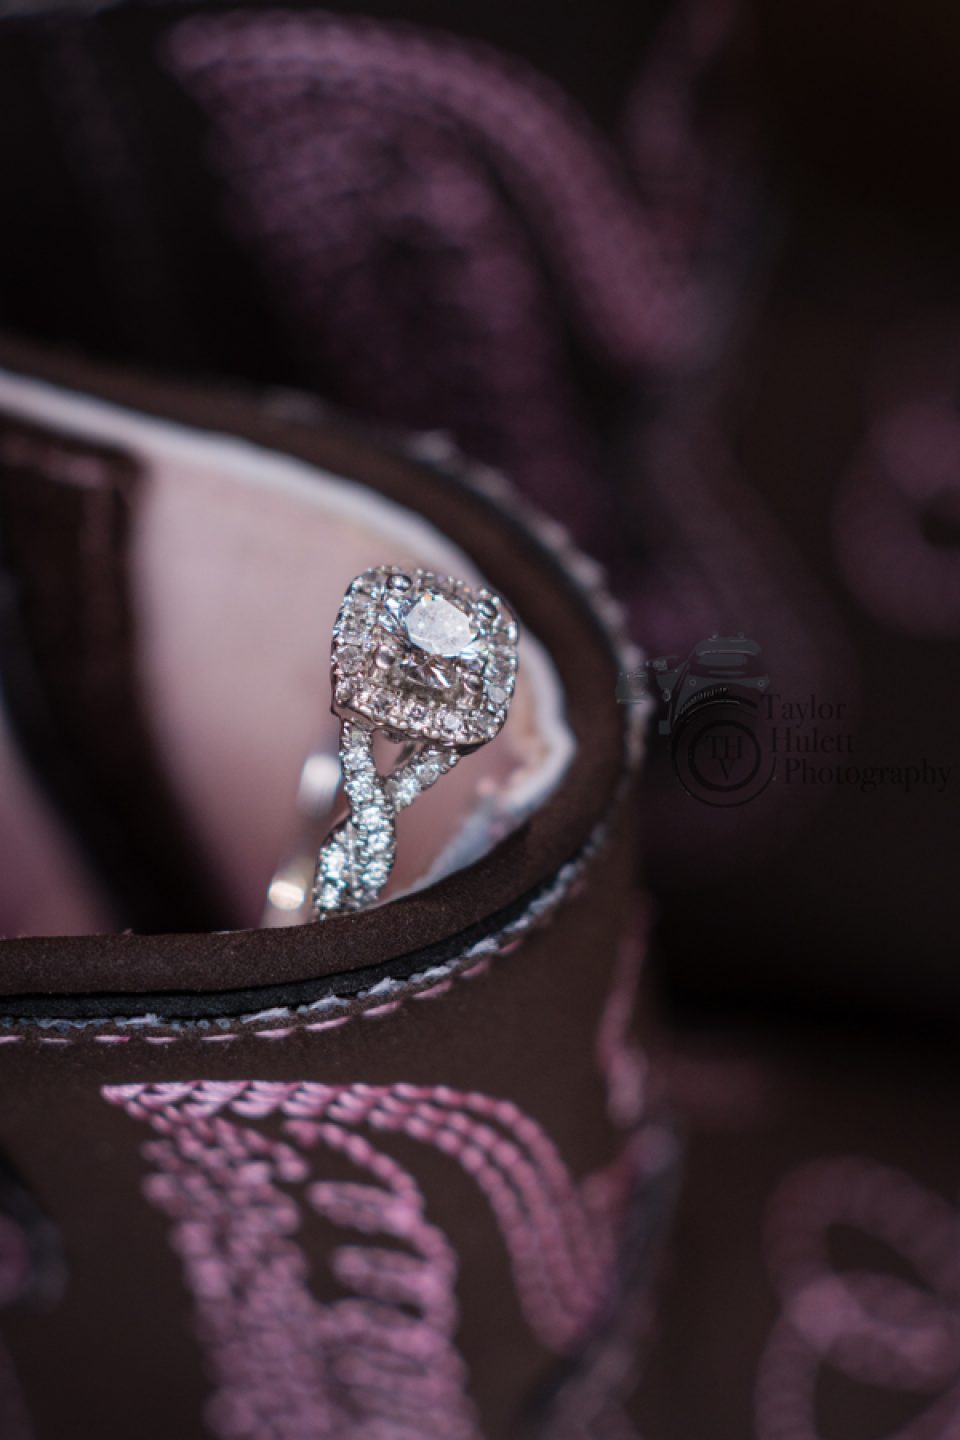 Wedding ring in baby boot